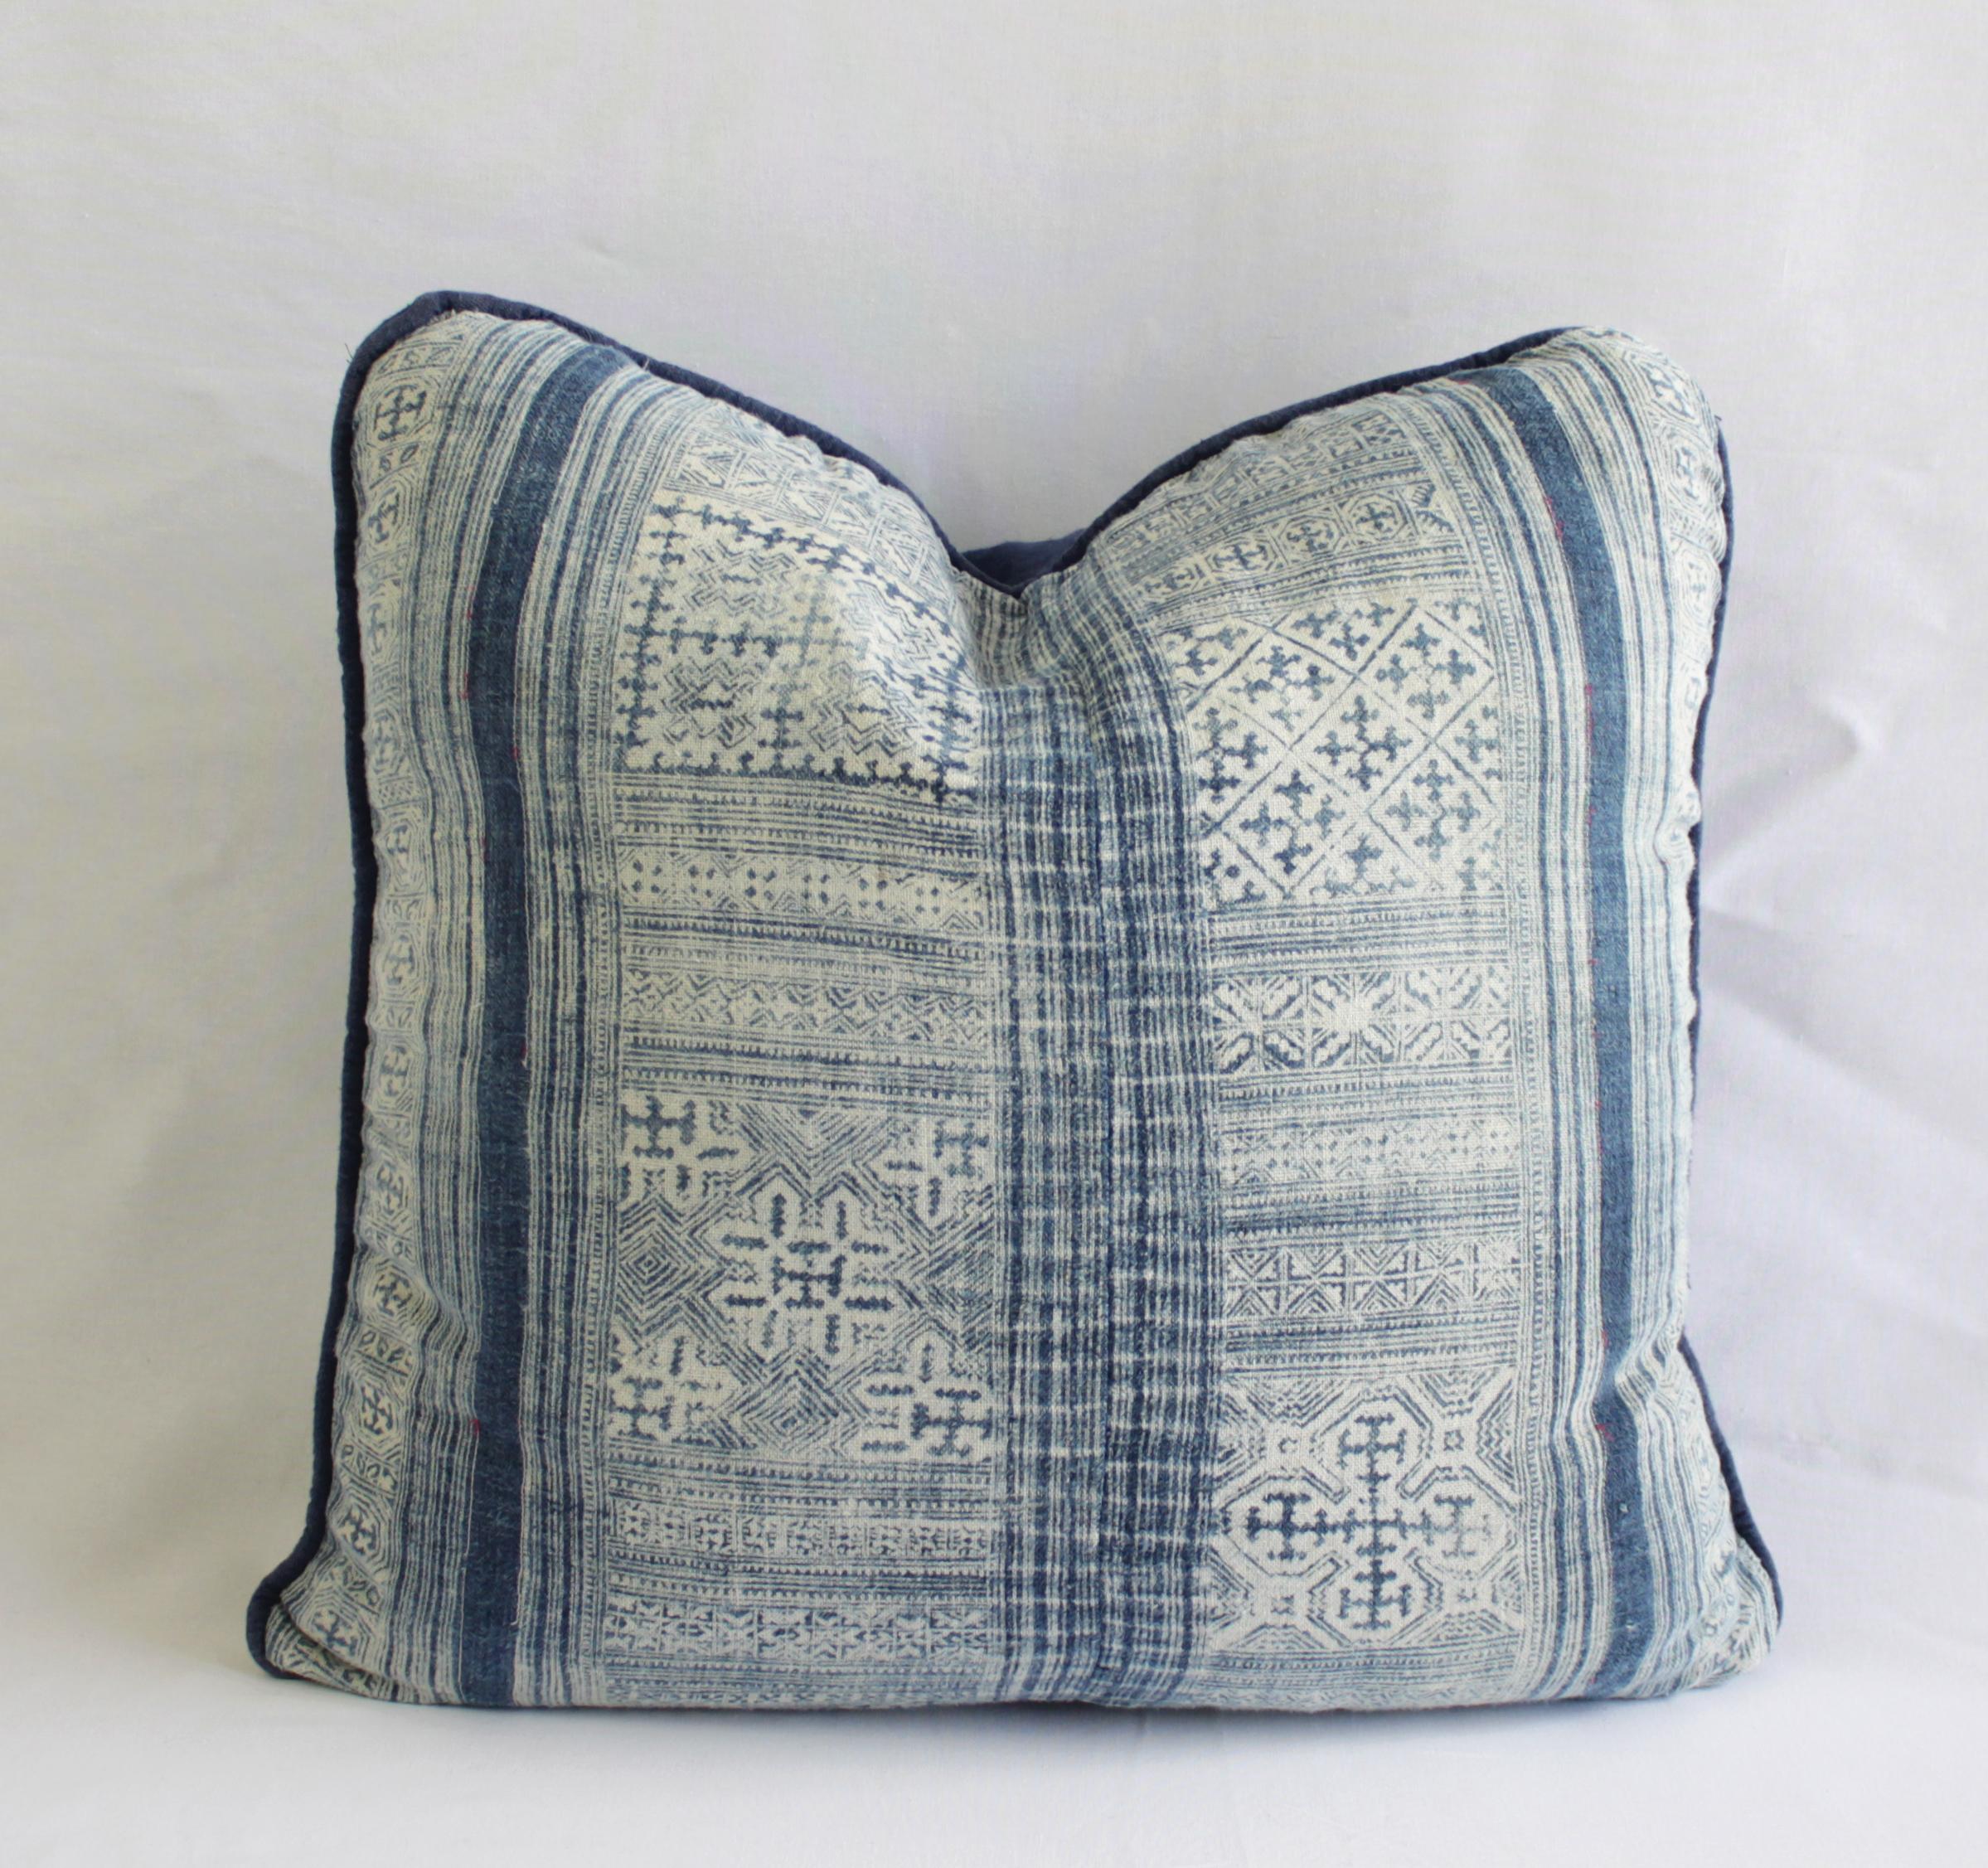 A beautiful indigo blue batik pattern, these pillows are custom made in our studios from vintage textiles. The front of the pillow are a beautiful pattern, with light and dark blue markings, on a nubby textural fabric. The back is a solid Belgian